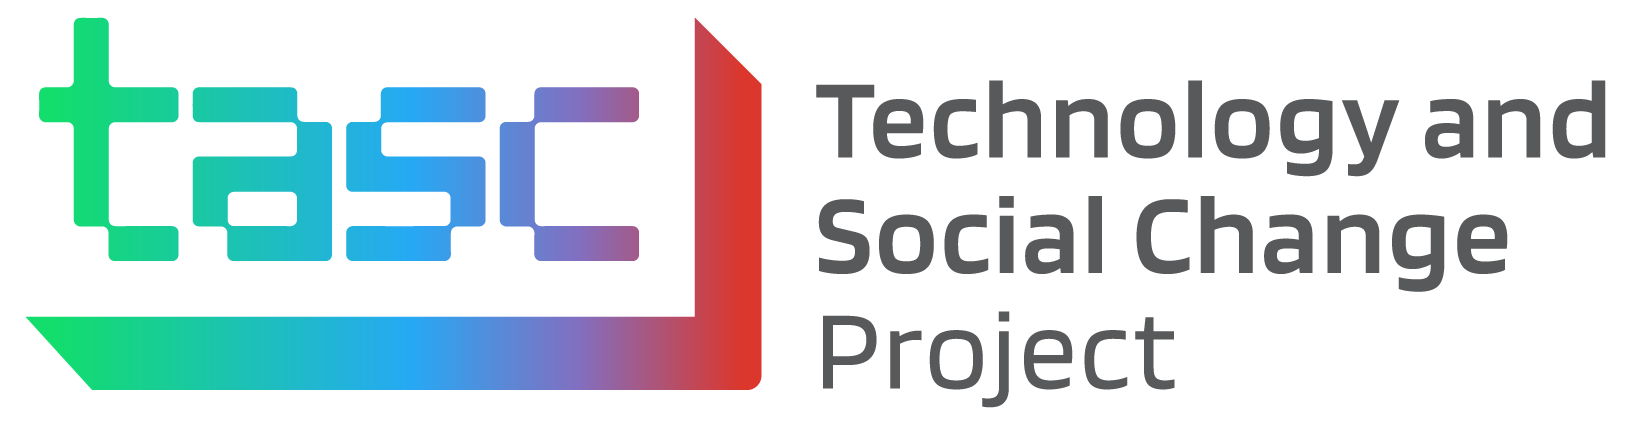 Open Technology and Social Change Project Site